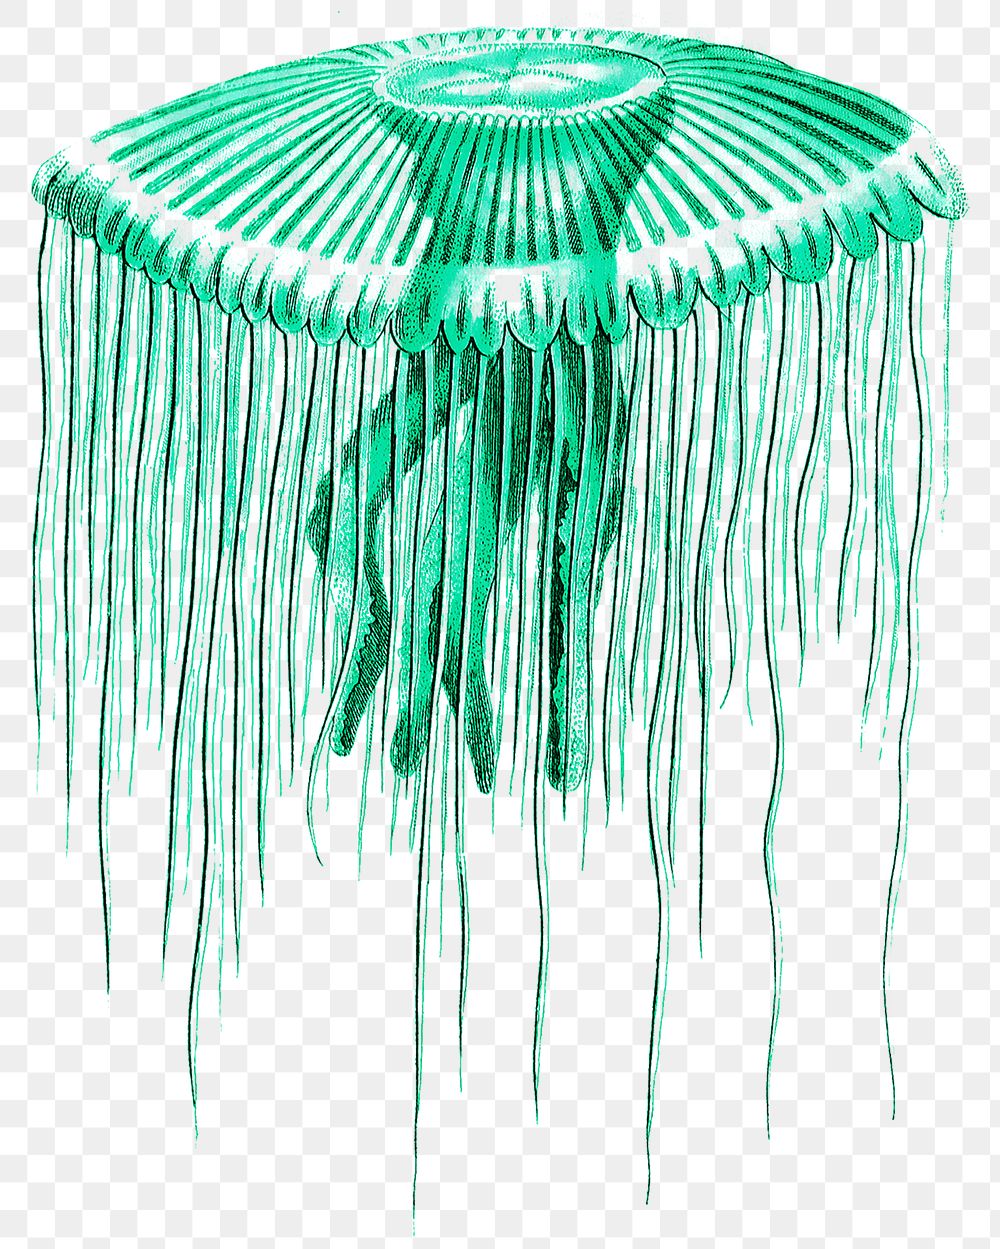 Vintage green jellyfish png sticker illustration, remixed from public domain artworks